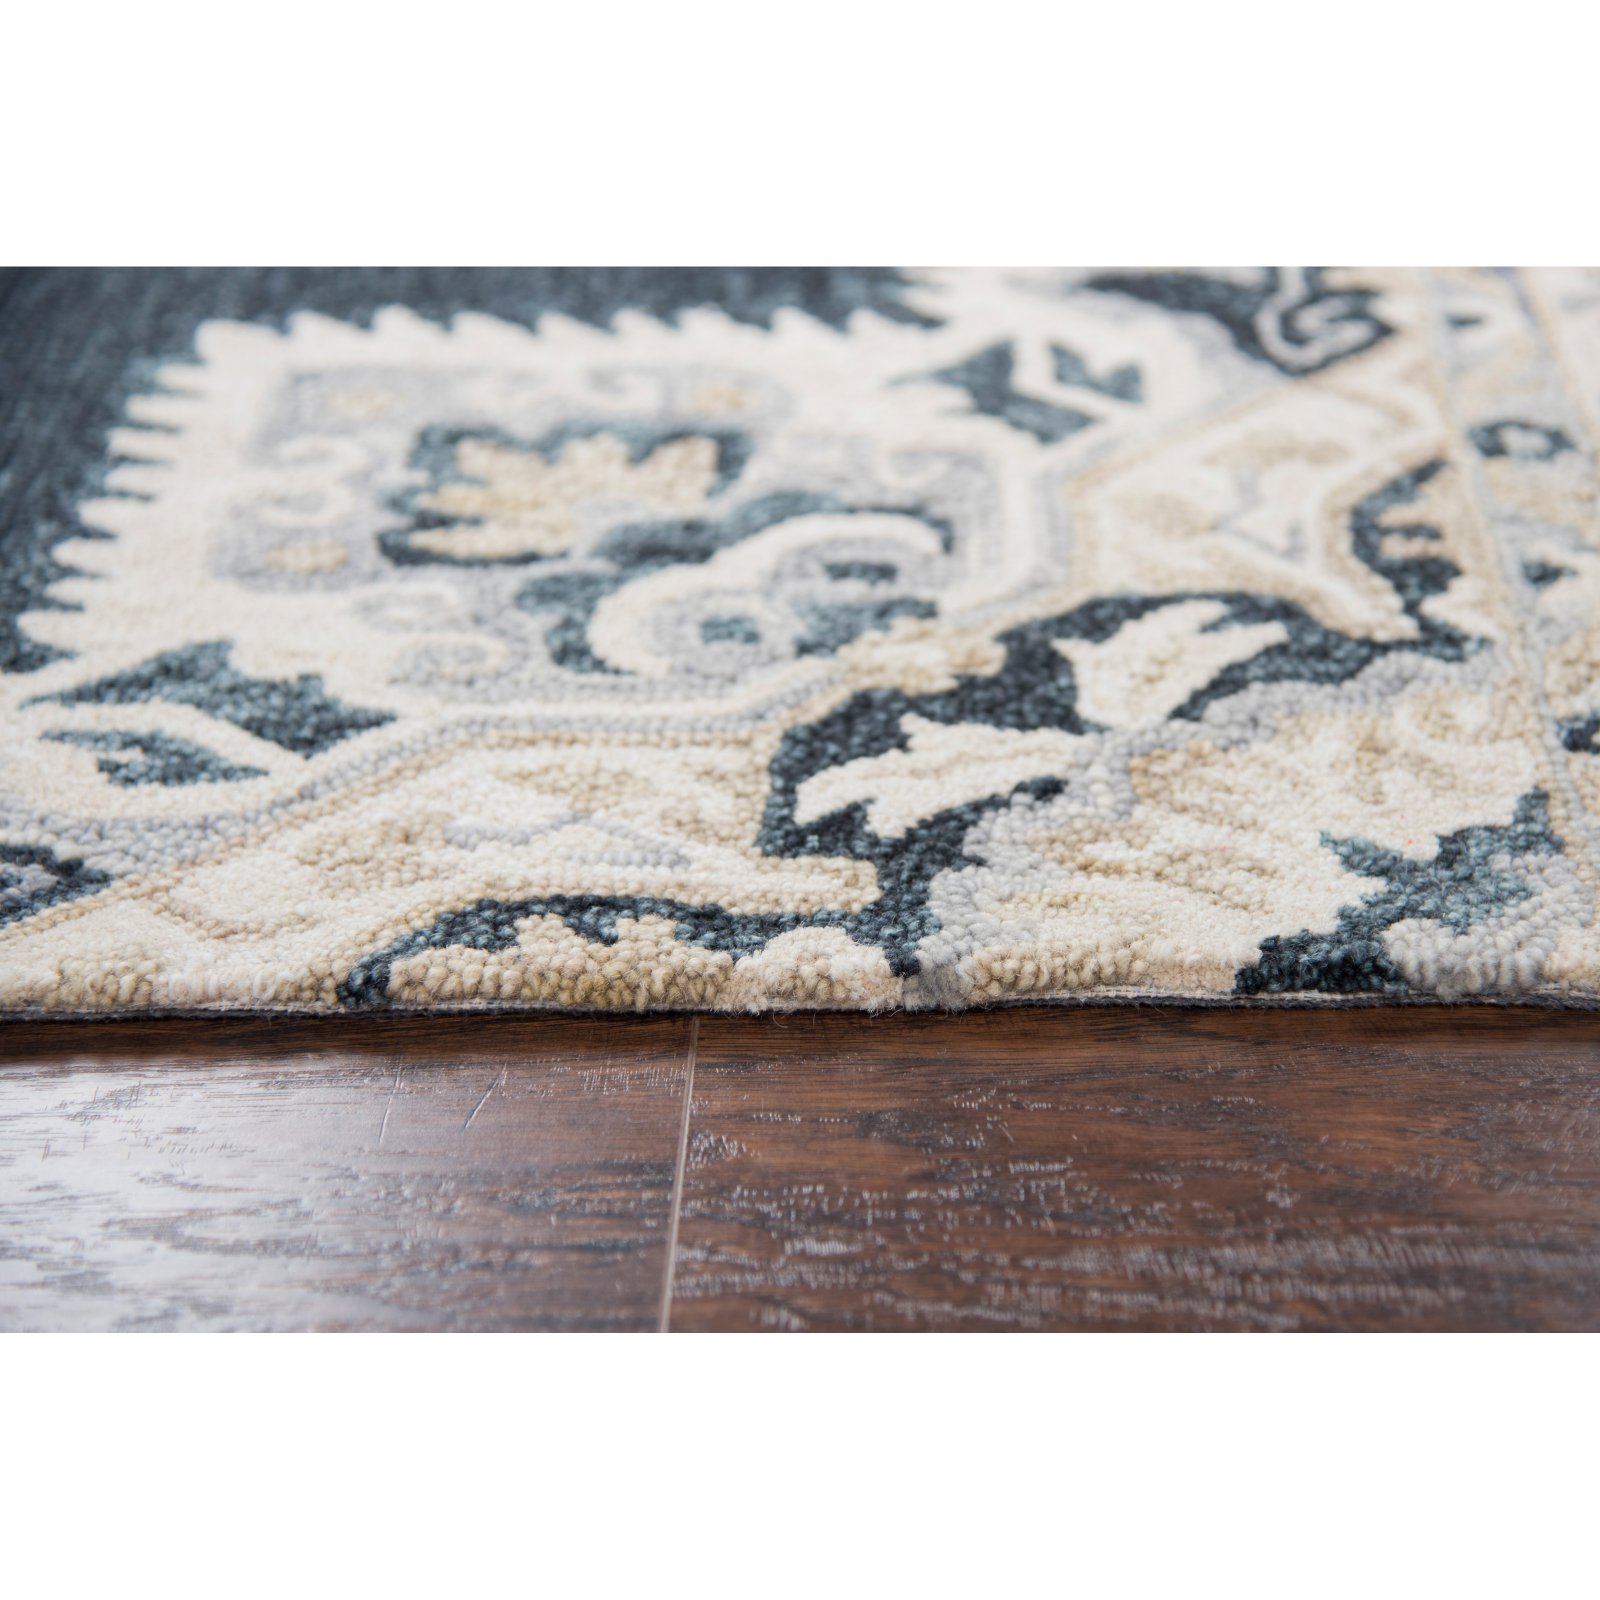 Rizzy Home RS070B Dark Blue 2'6" x 8' Hand-Tufted Area Rug - image 3 of 6